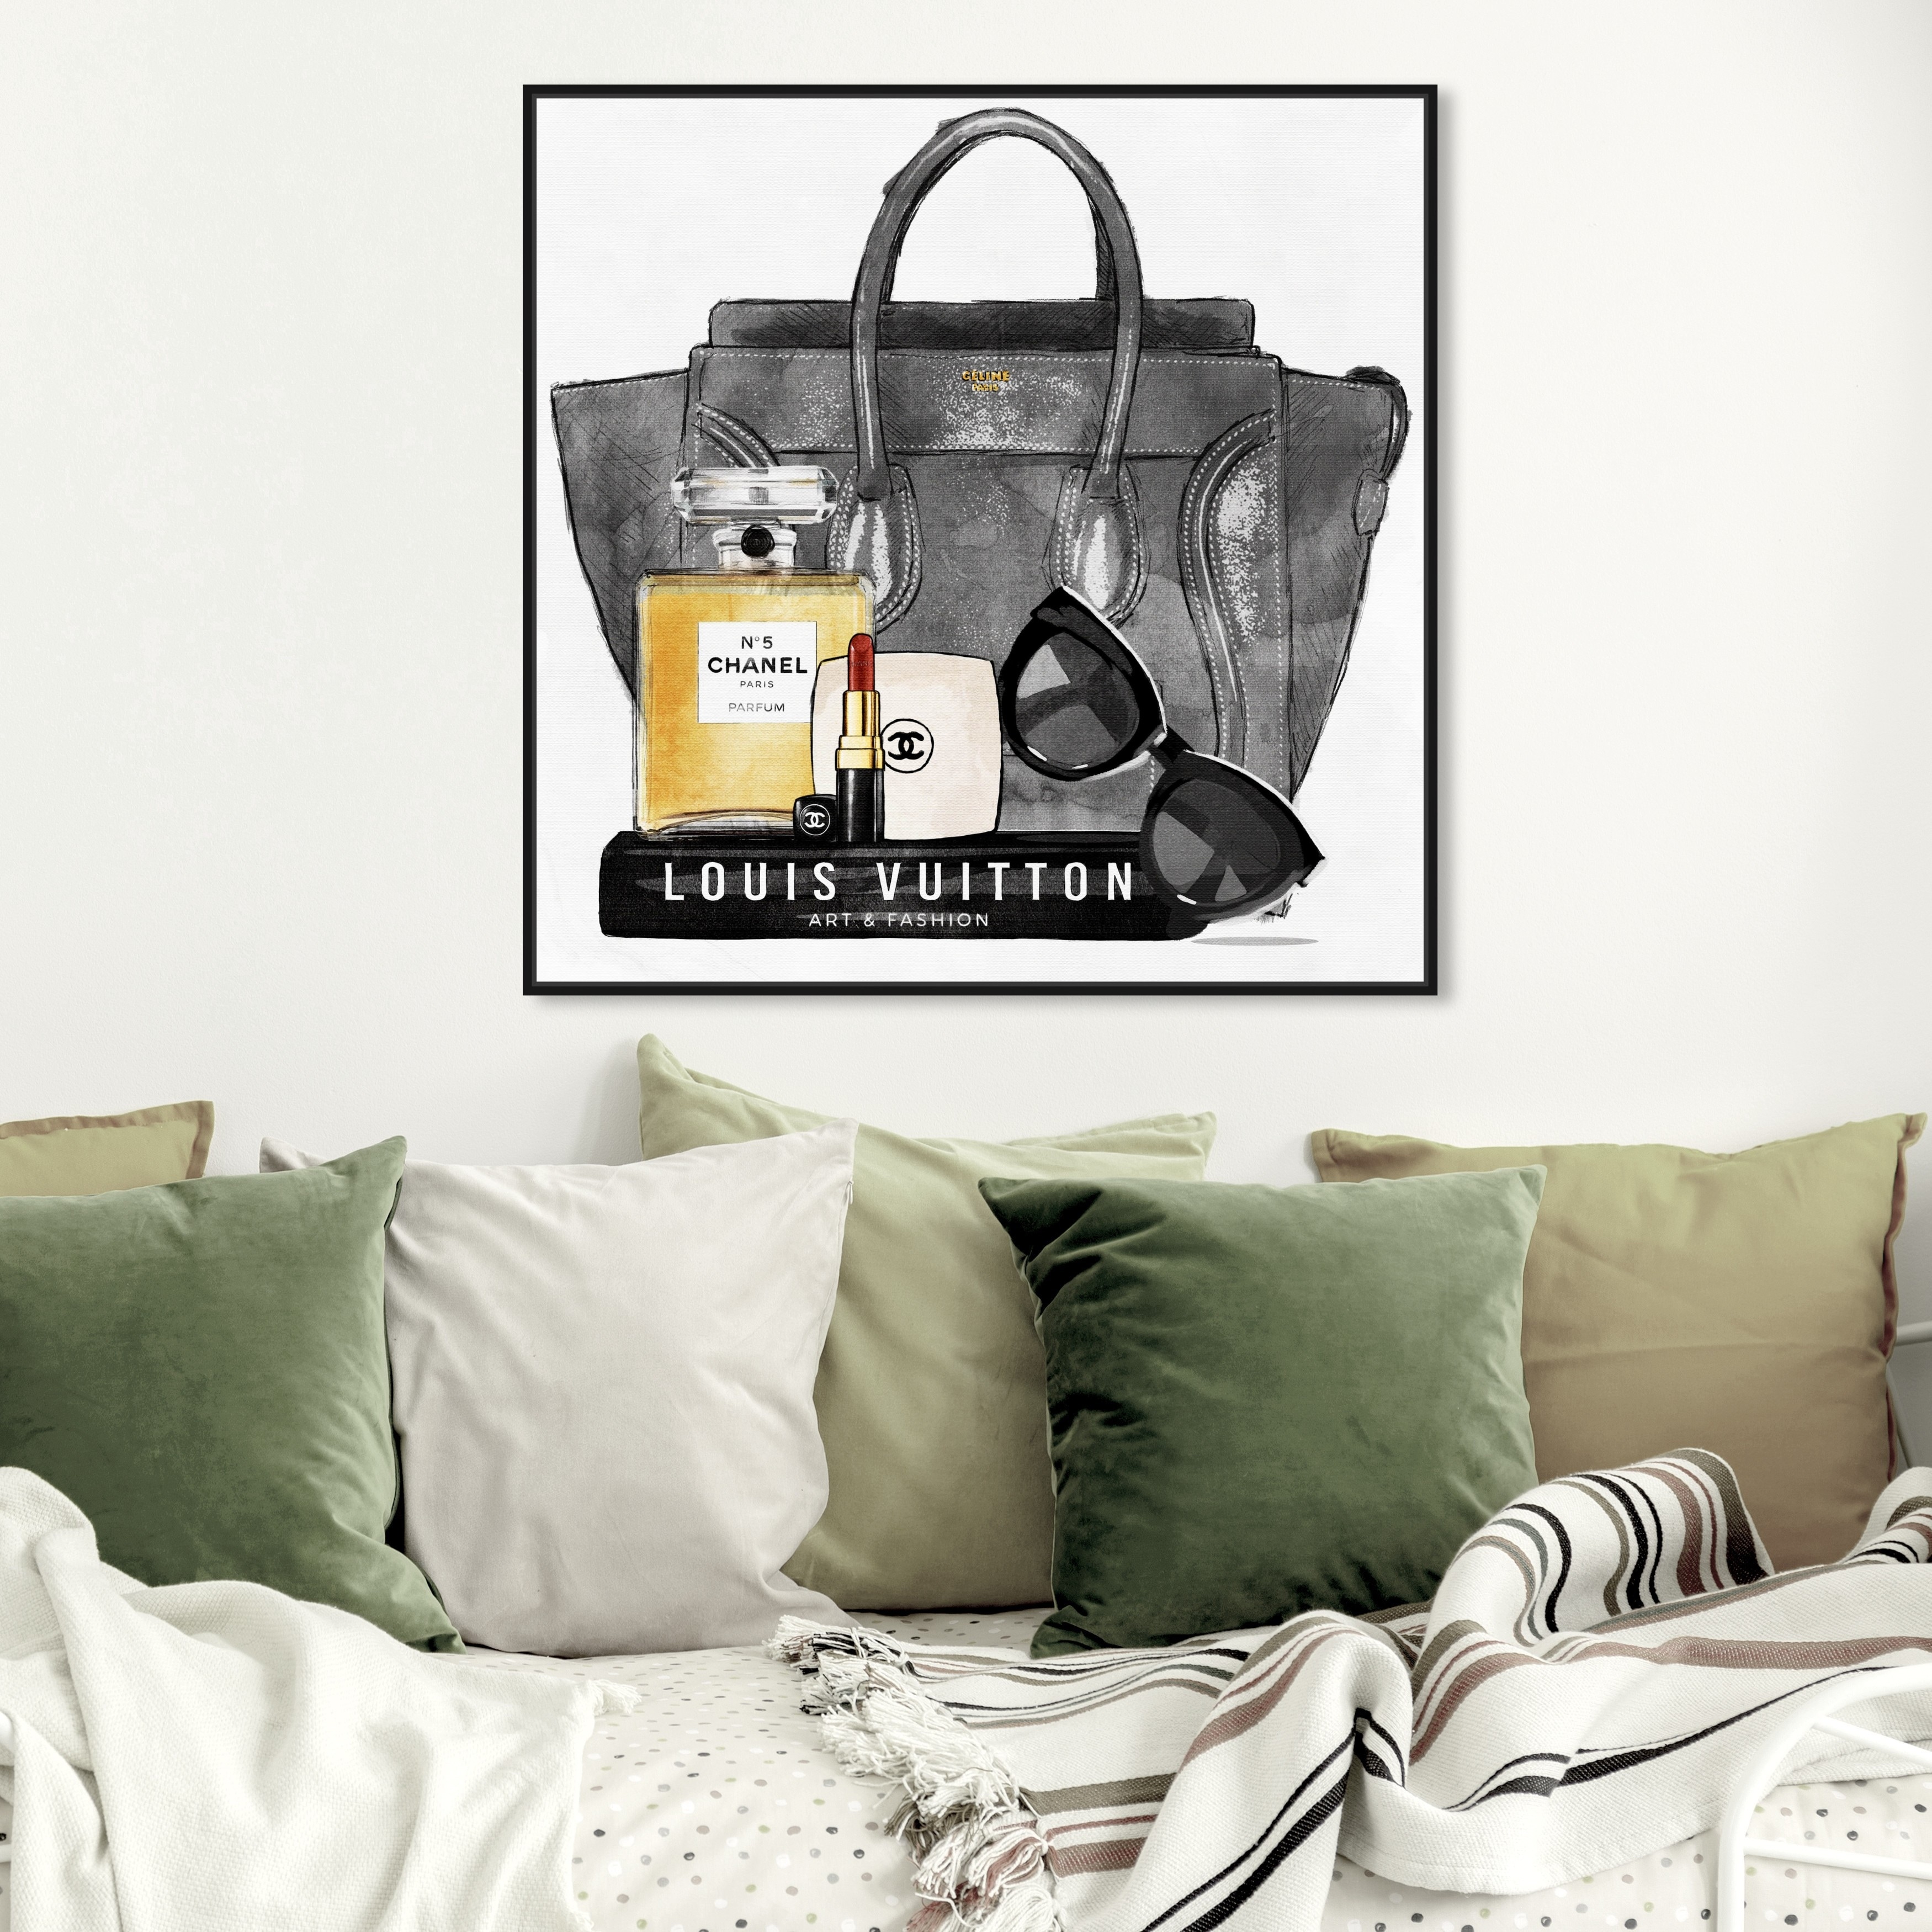 Oliver Gal 'My Everyday Purse' Fashion and Glam Wall Art Framed Canvas Print Handbags - Black, Yellow - 16 x 16 - Gold